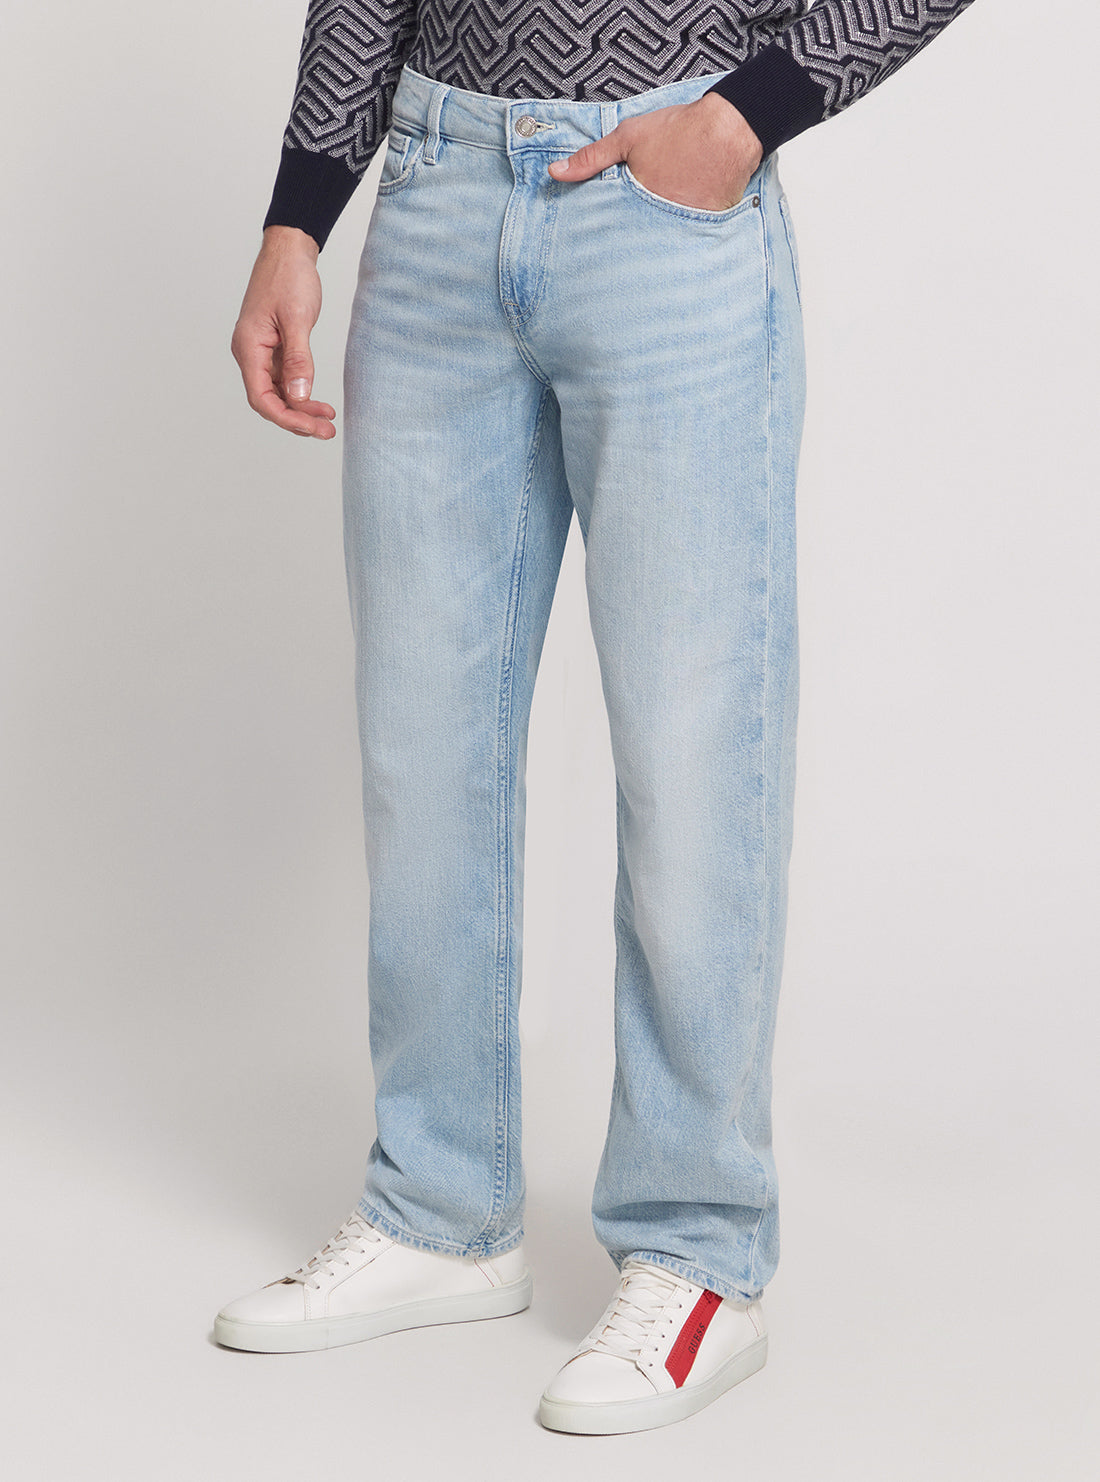 GUESS Low-Rise Angels Denim Jeans in Light Wash front view